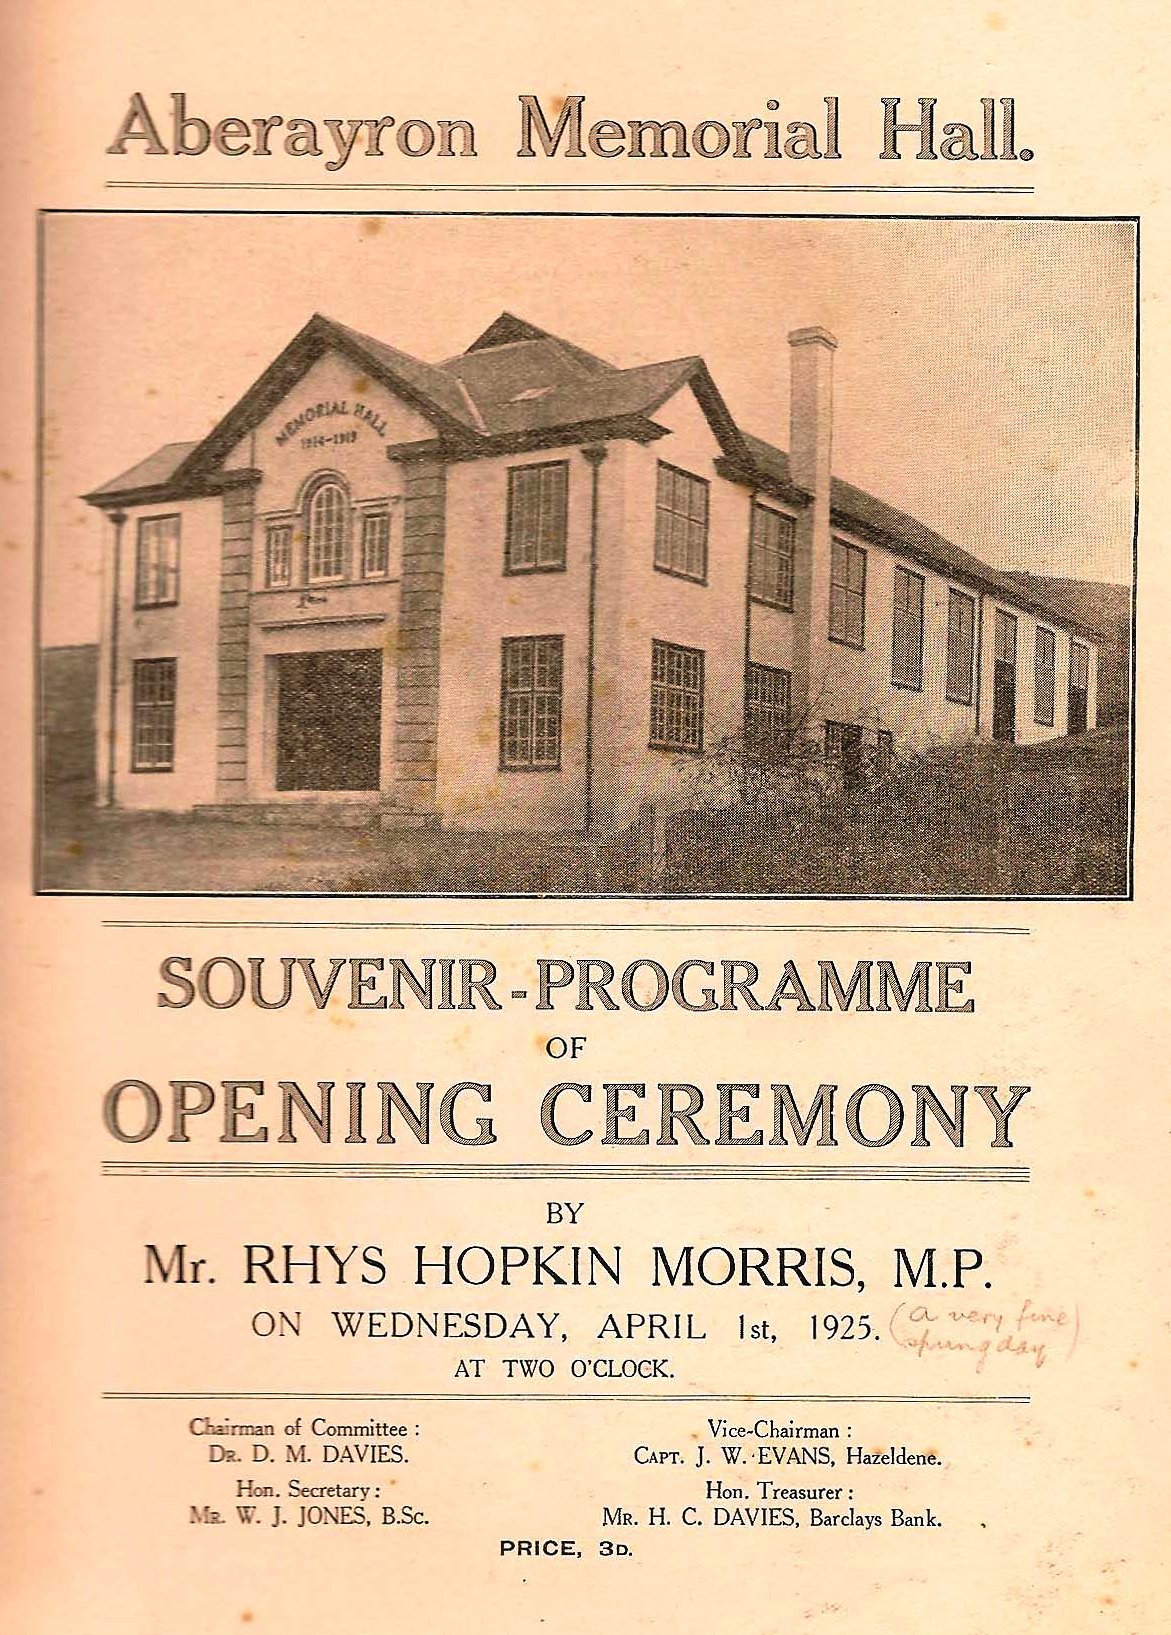 AMH opening p.1